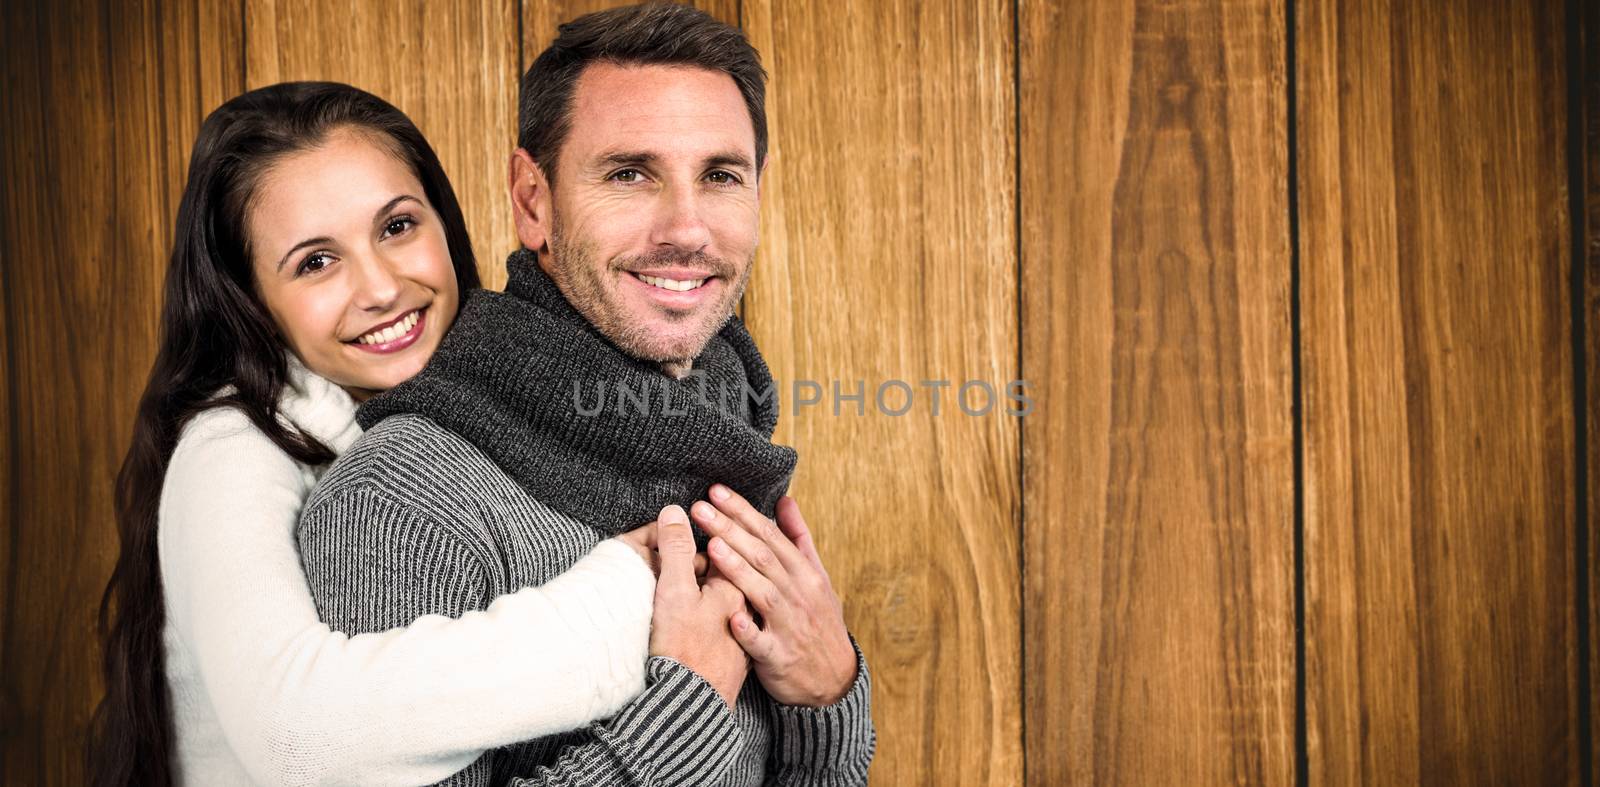 Smiling couple hugging and looking at camera against wooden background